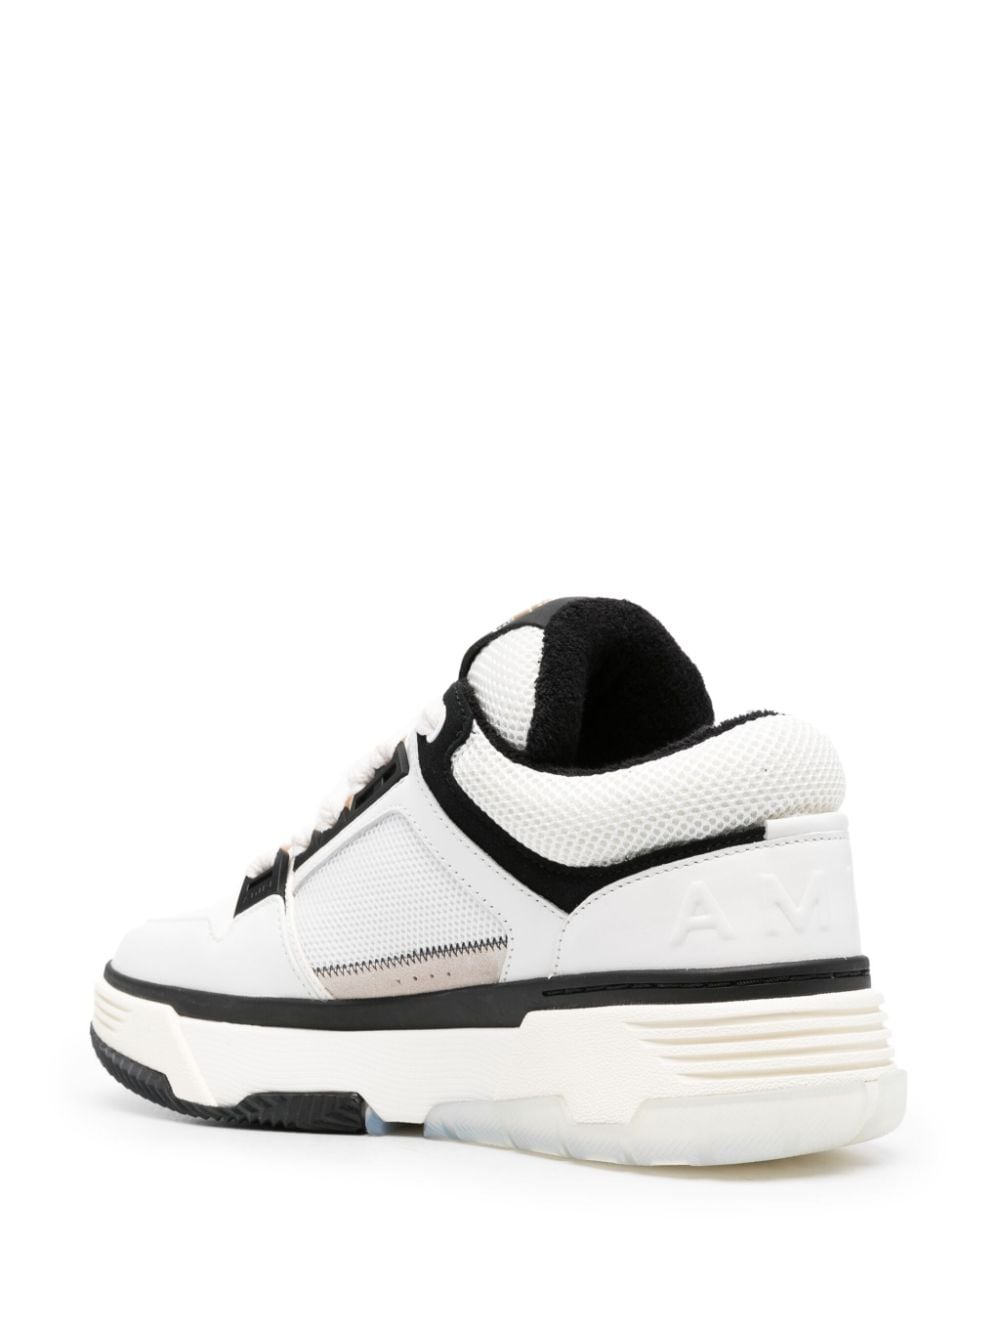 MA-1 leather sneakers